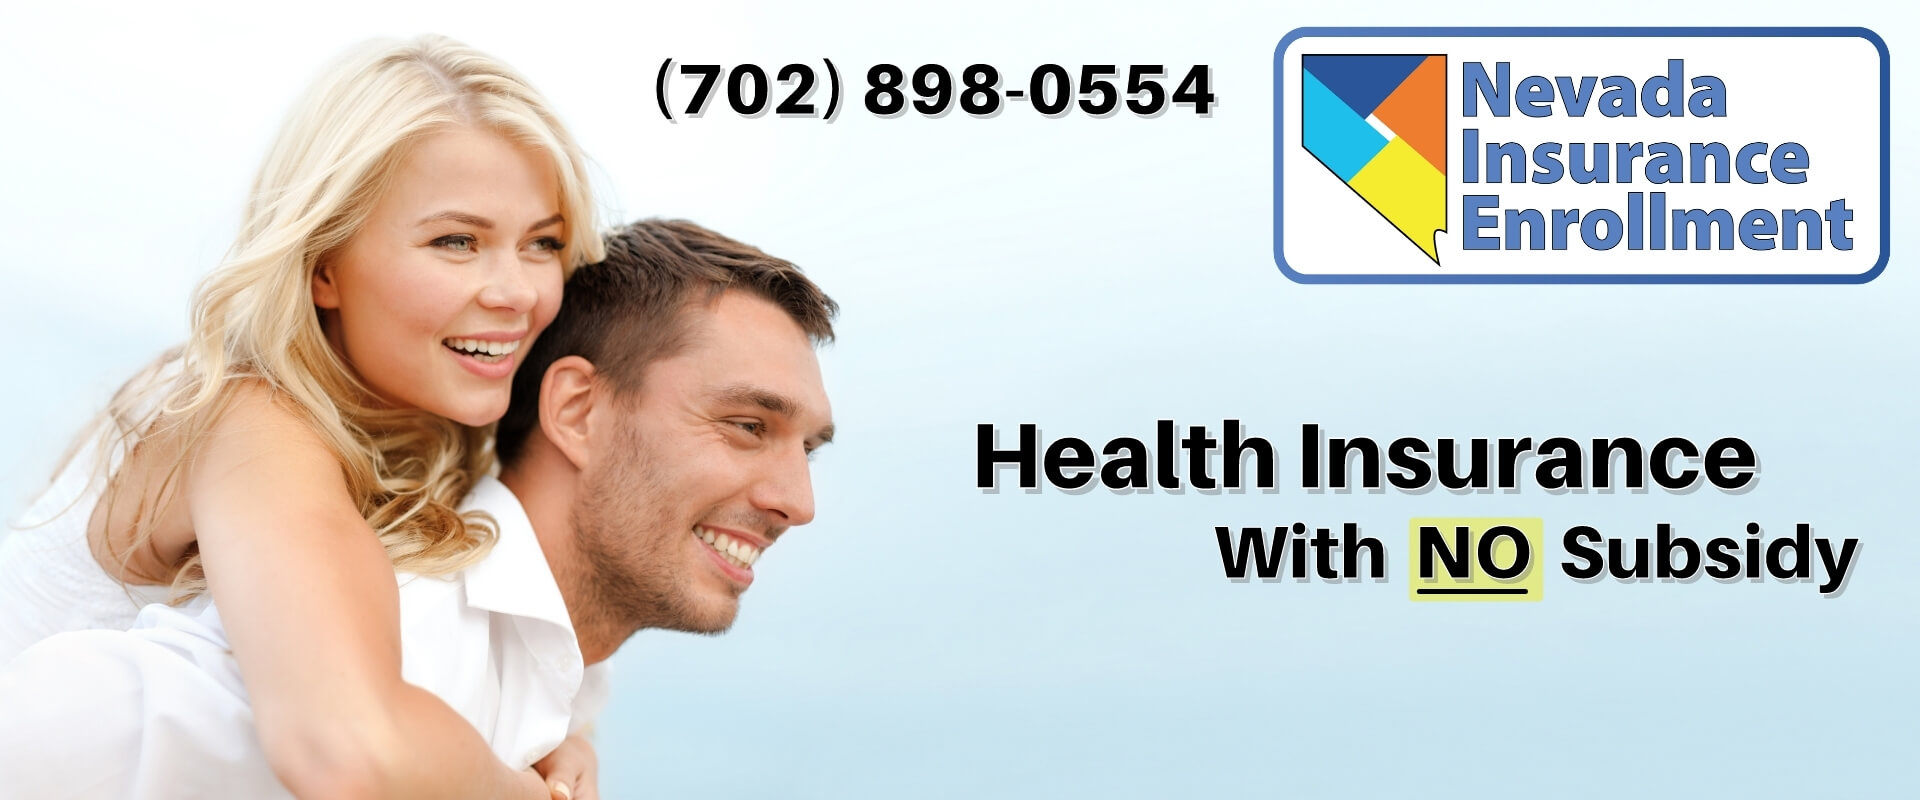 Health Insurance with NO subsidy MAIN page image